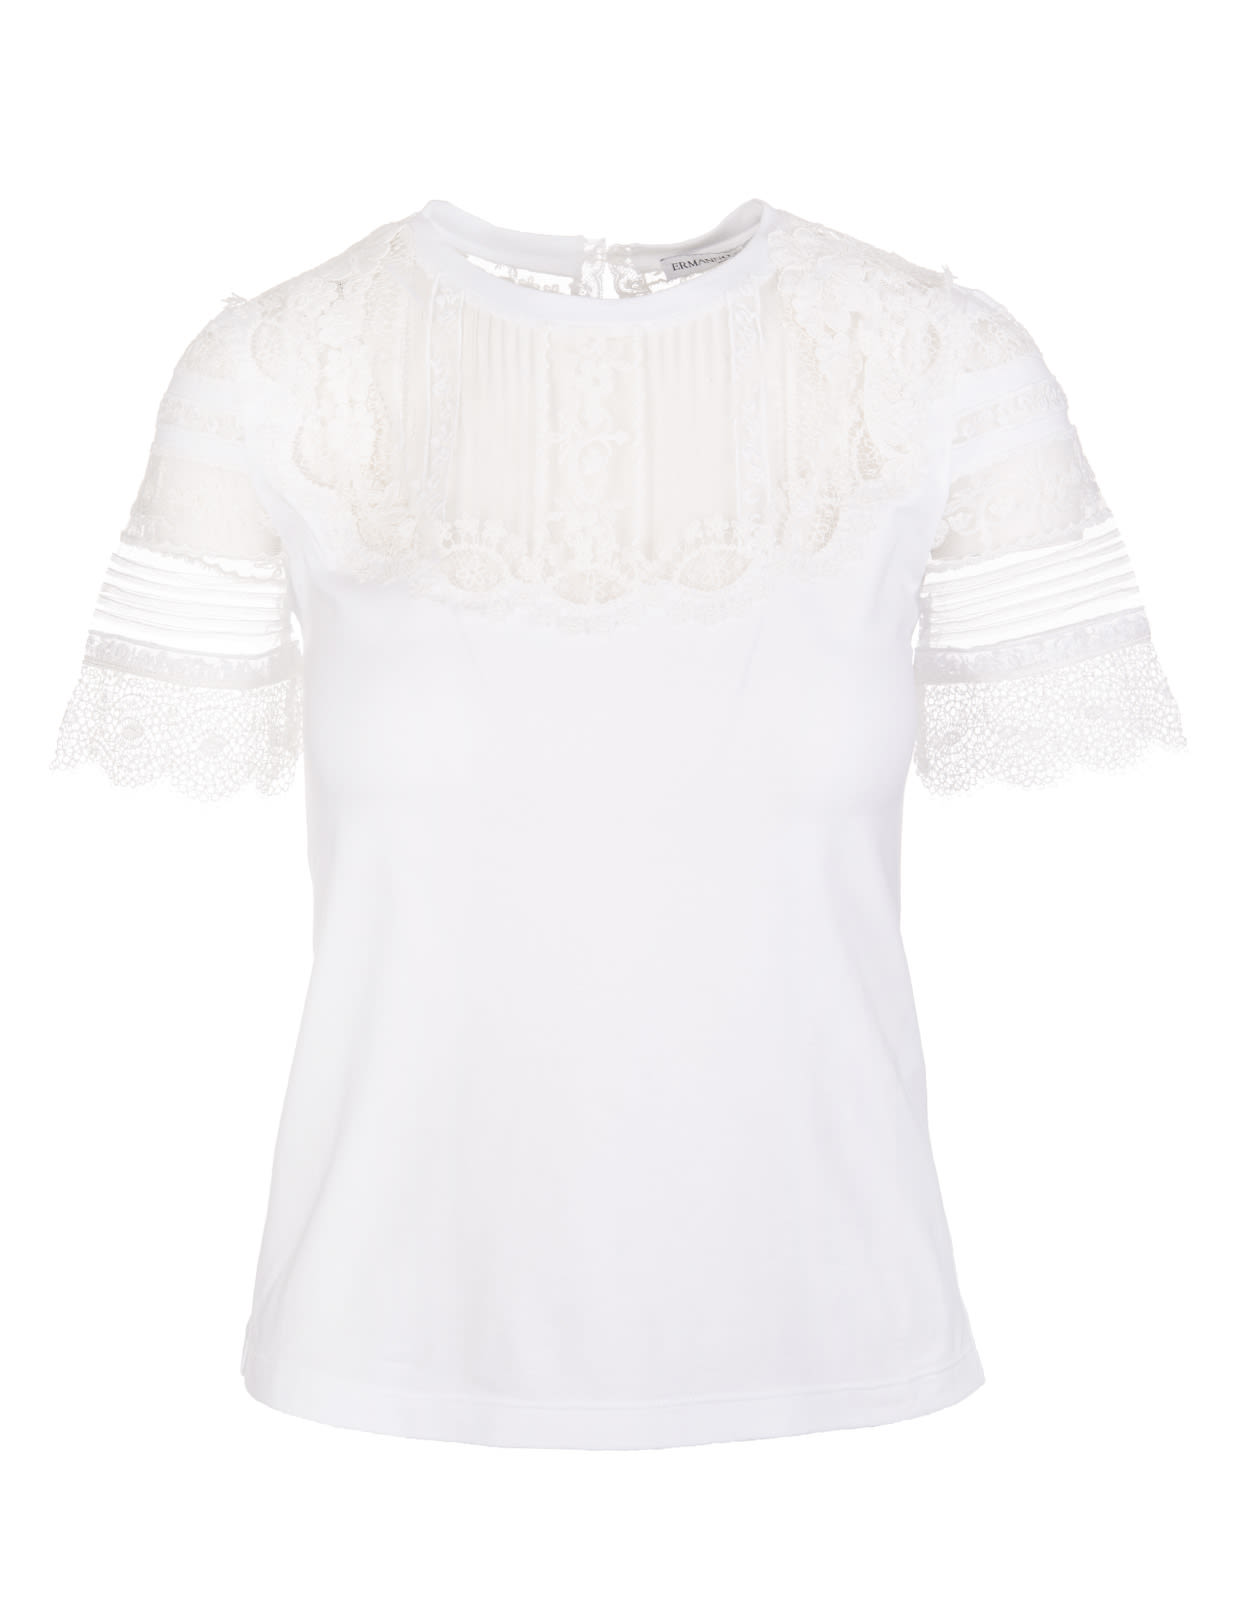 Ermanno Scervino White T-shirt Worked With Lace